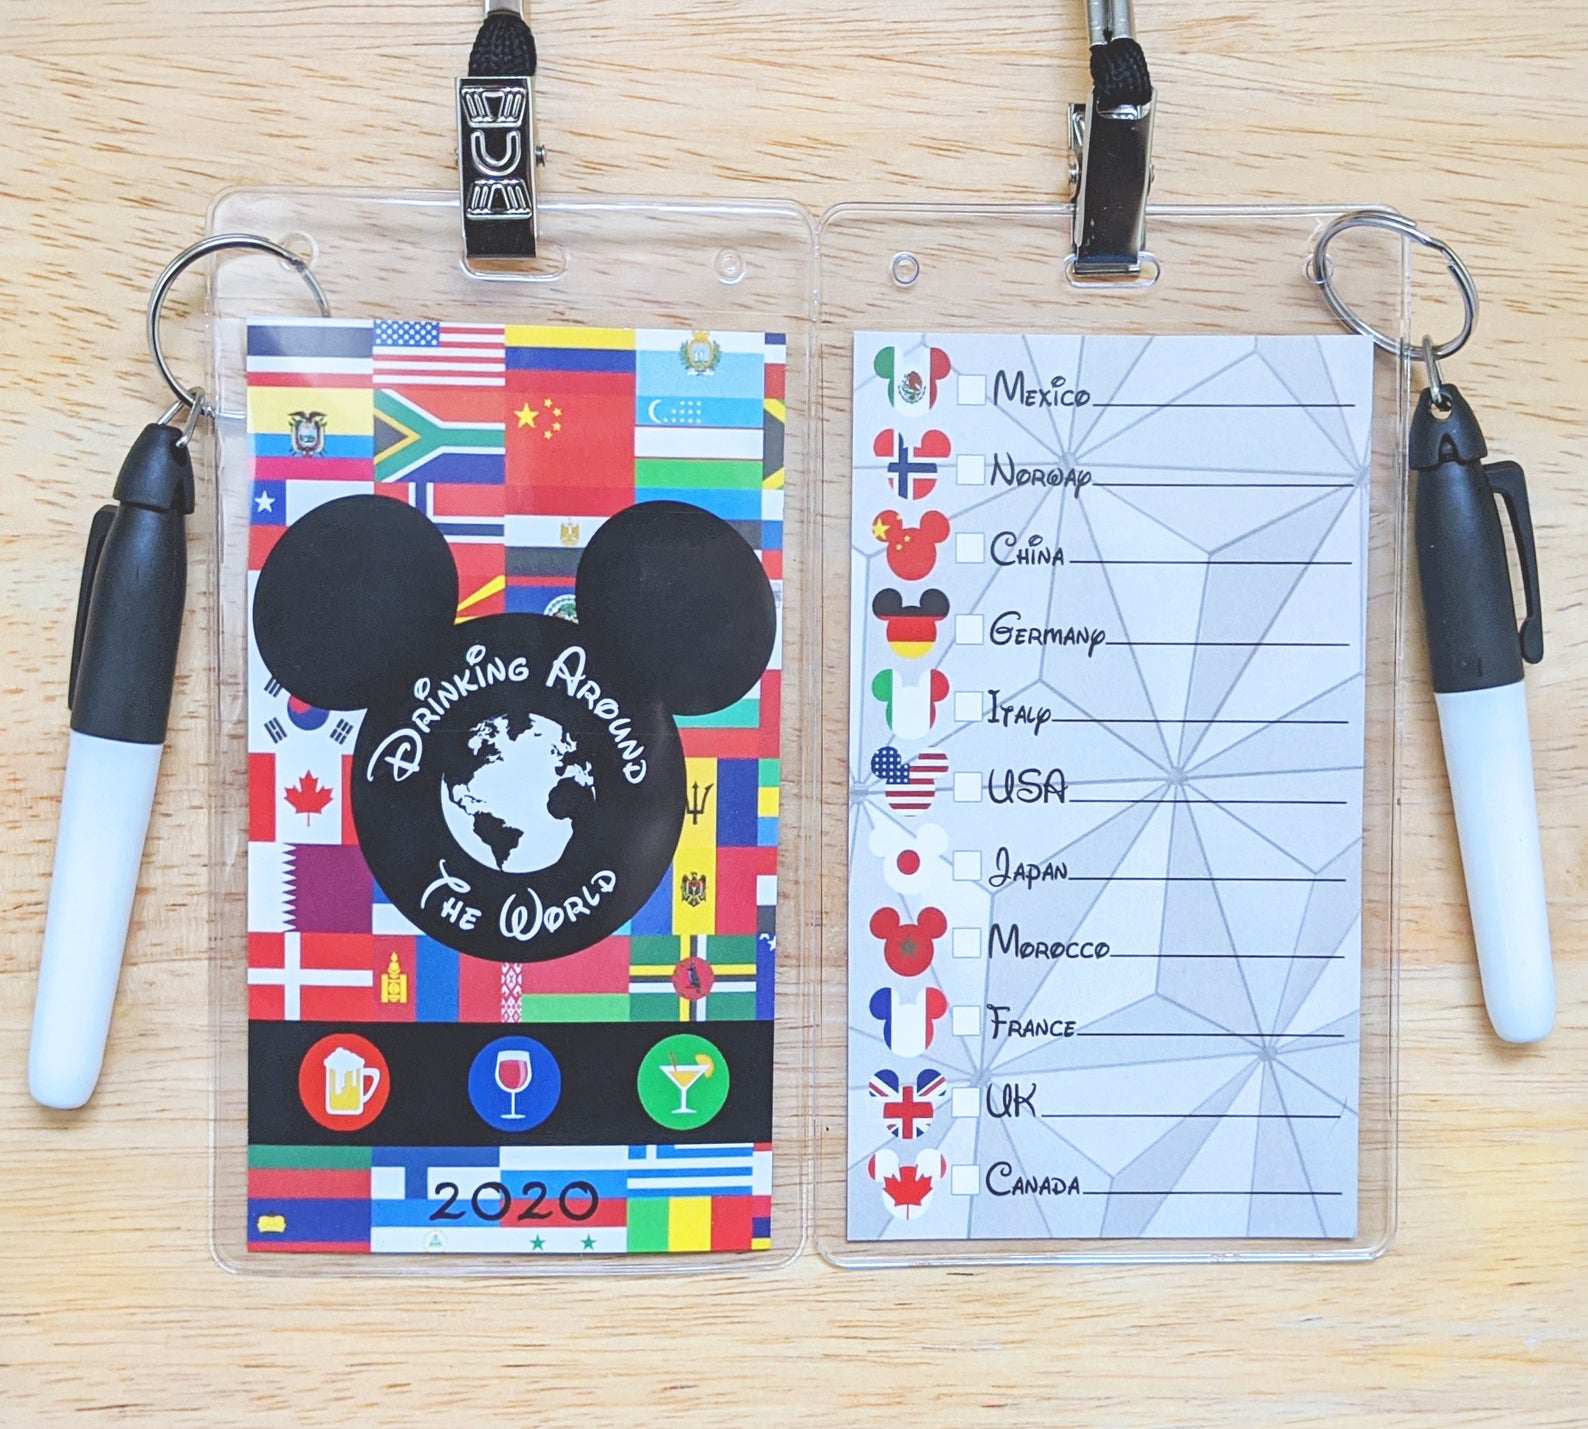 passport for drinking around Epcot from Etsy with magic markers